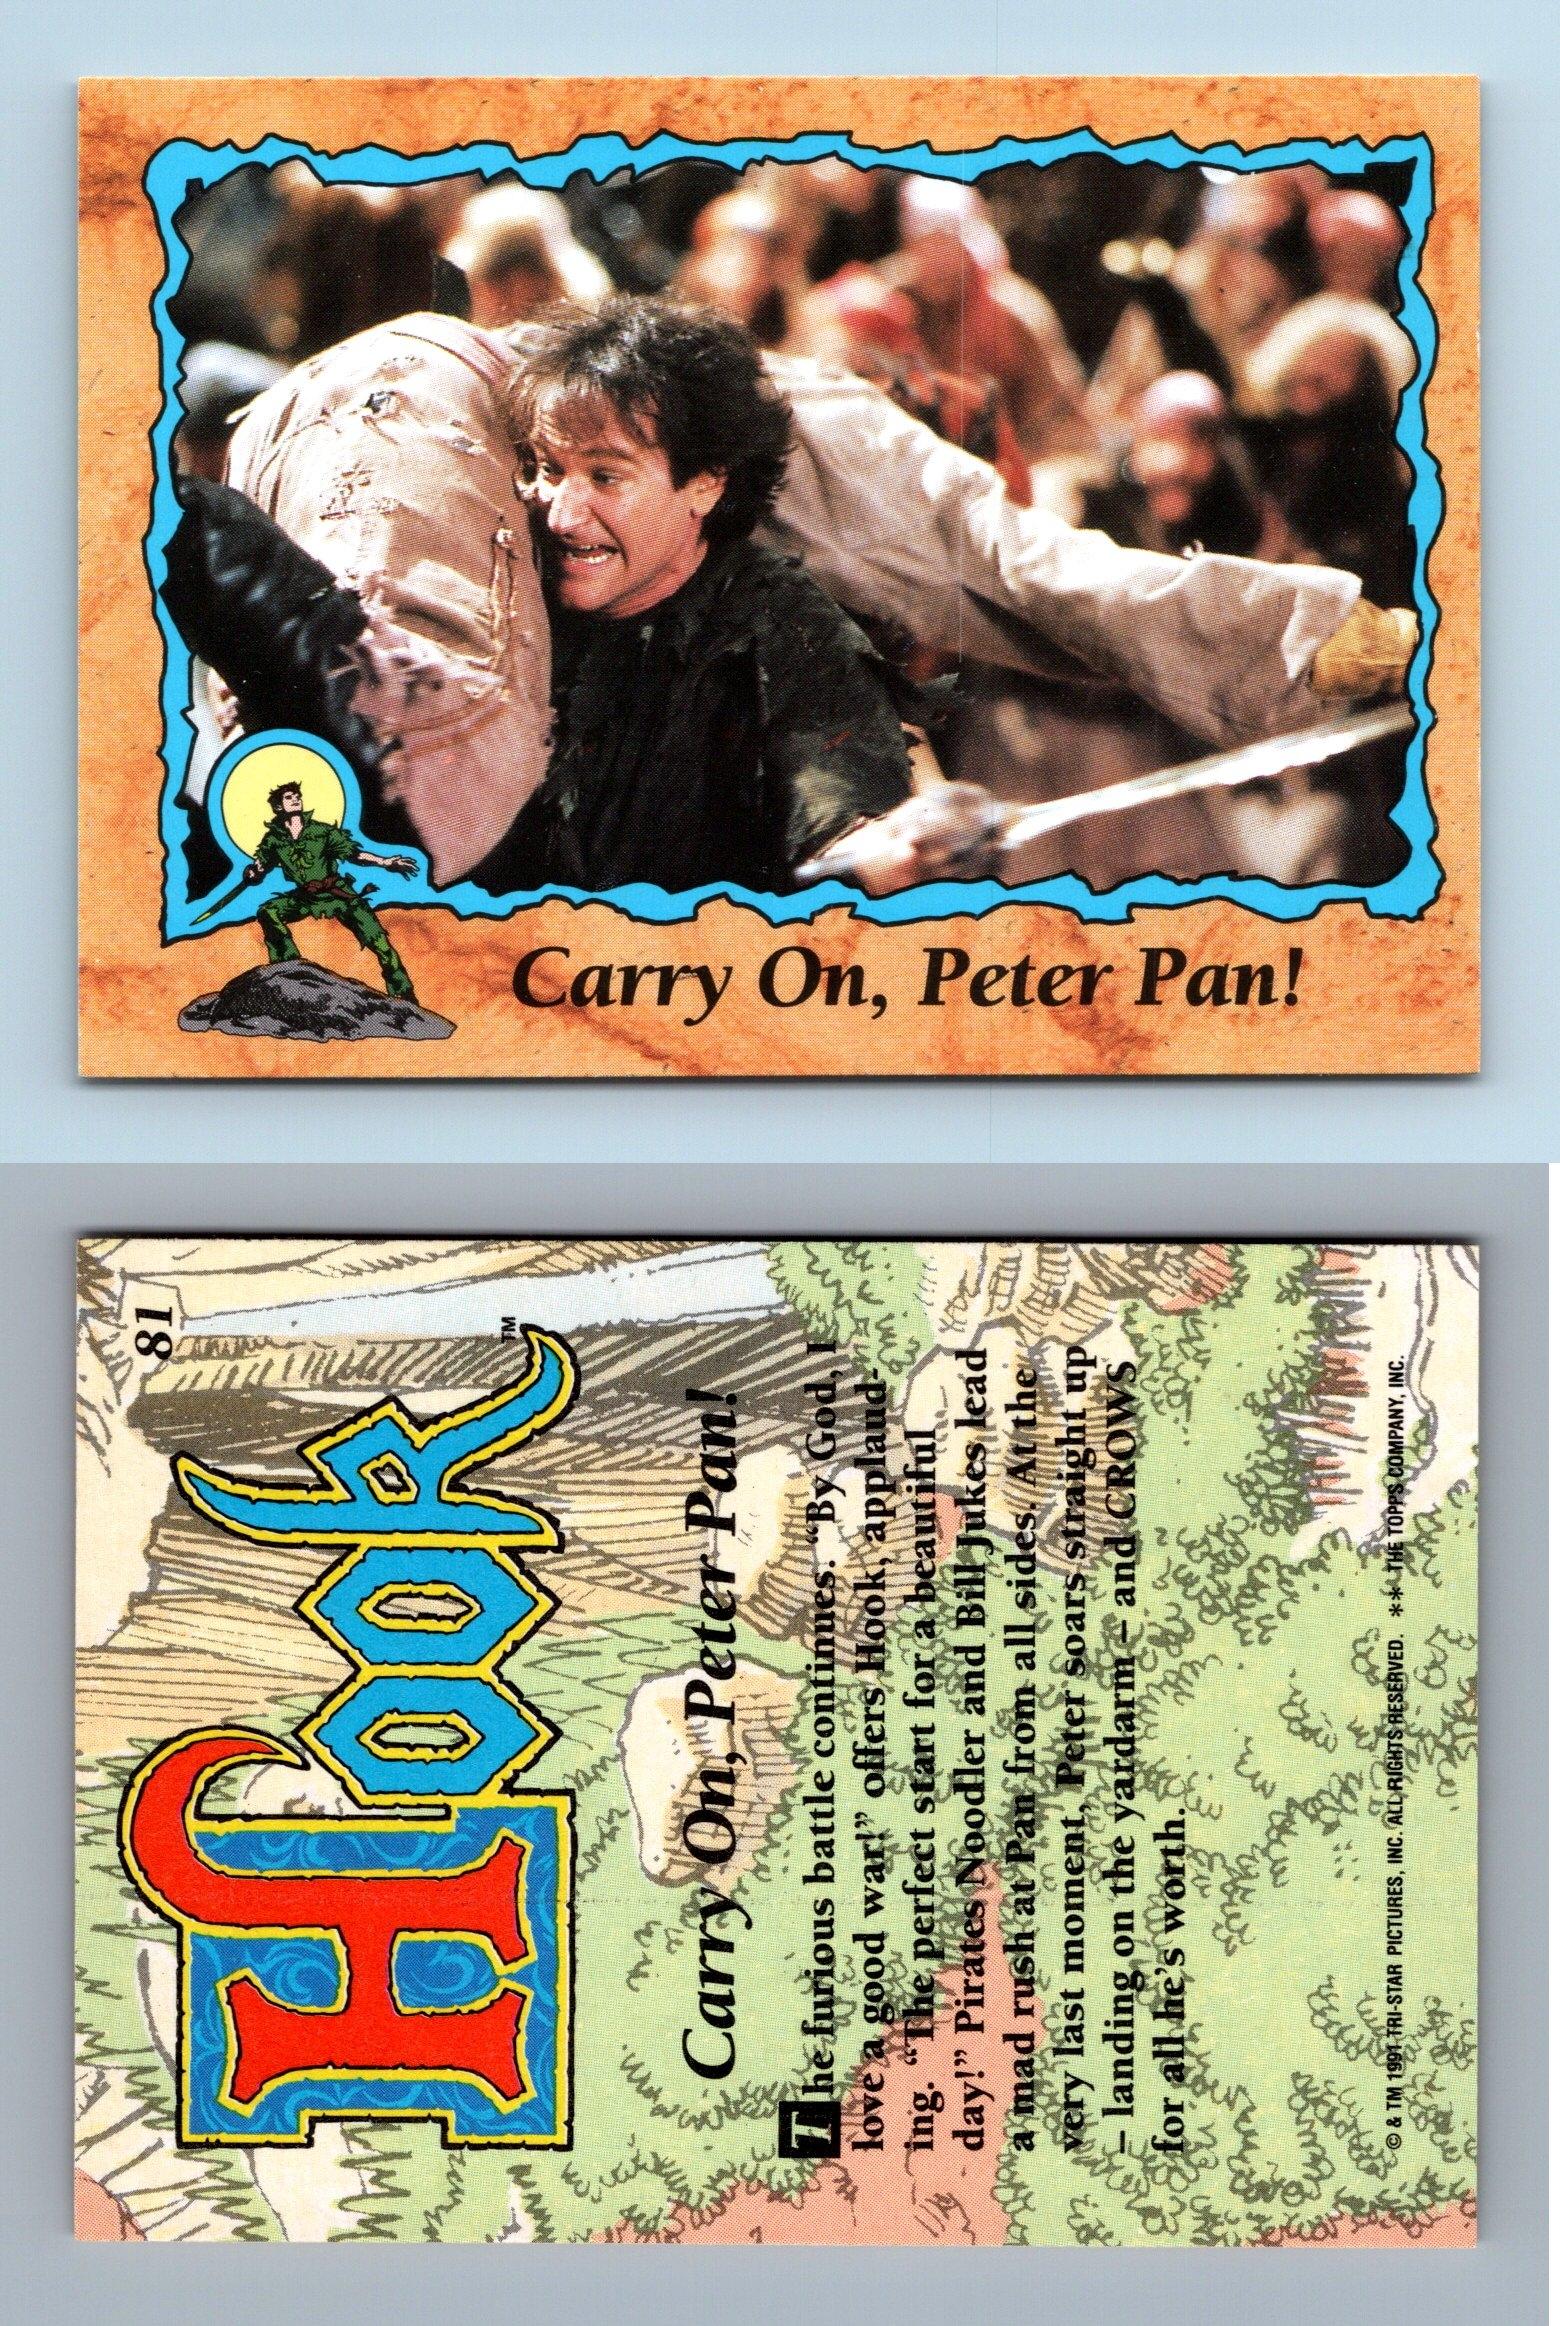 Carry On Peter Pan! #81 Hook 1991 Topps Trading Card